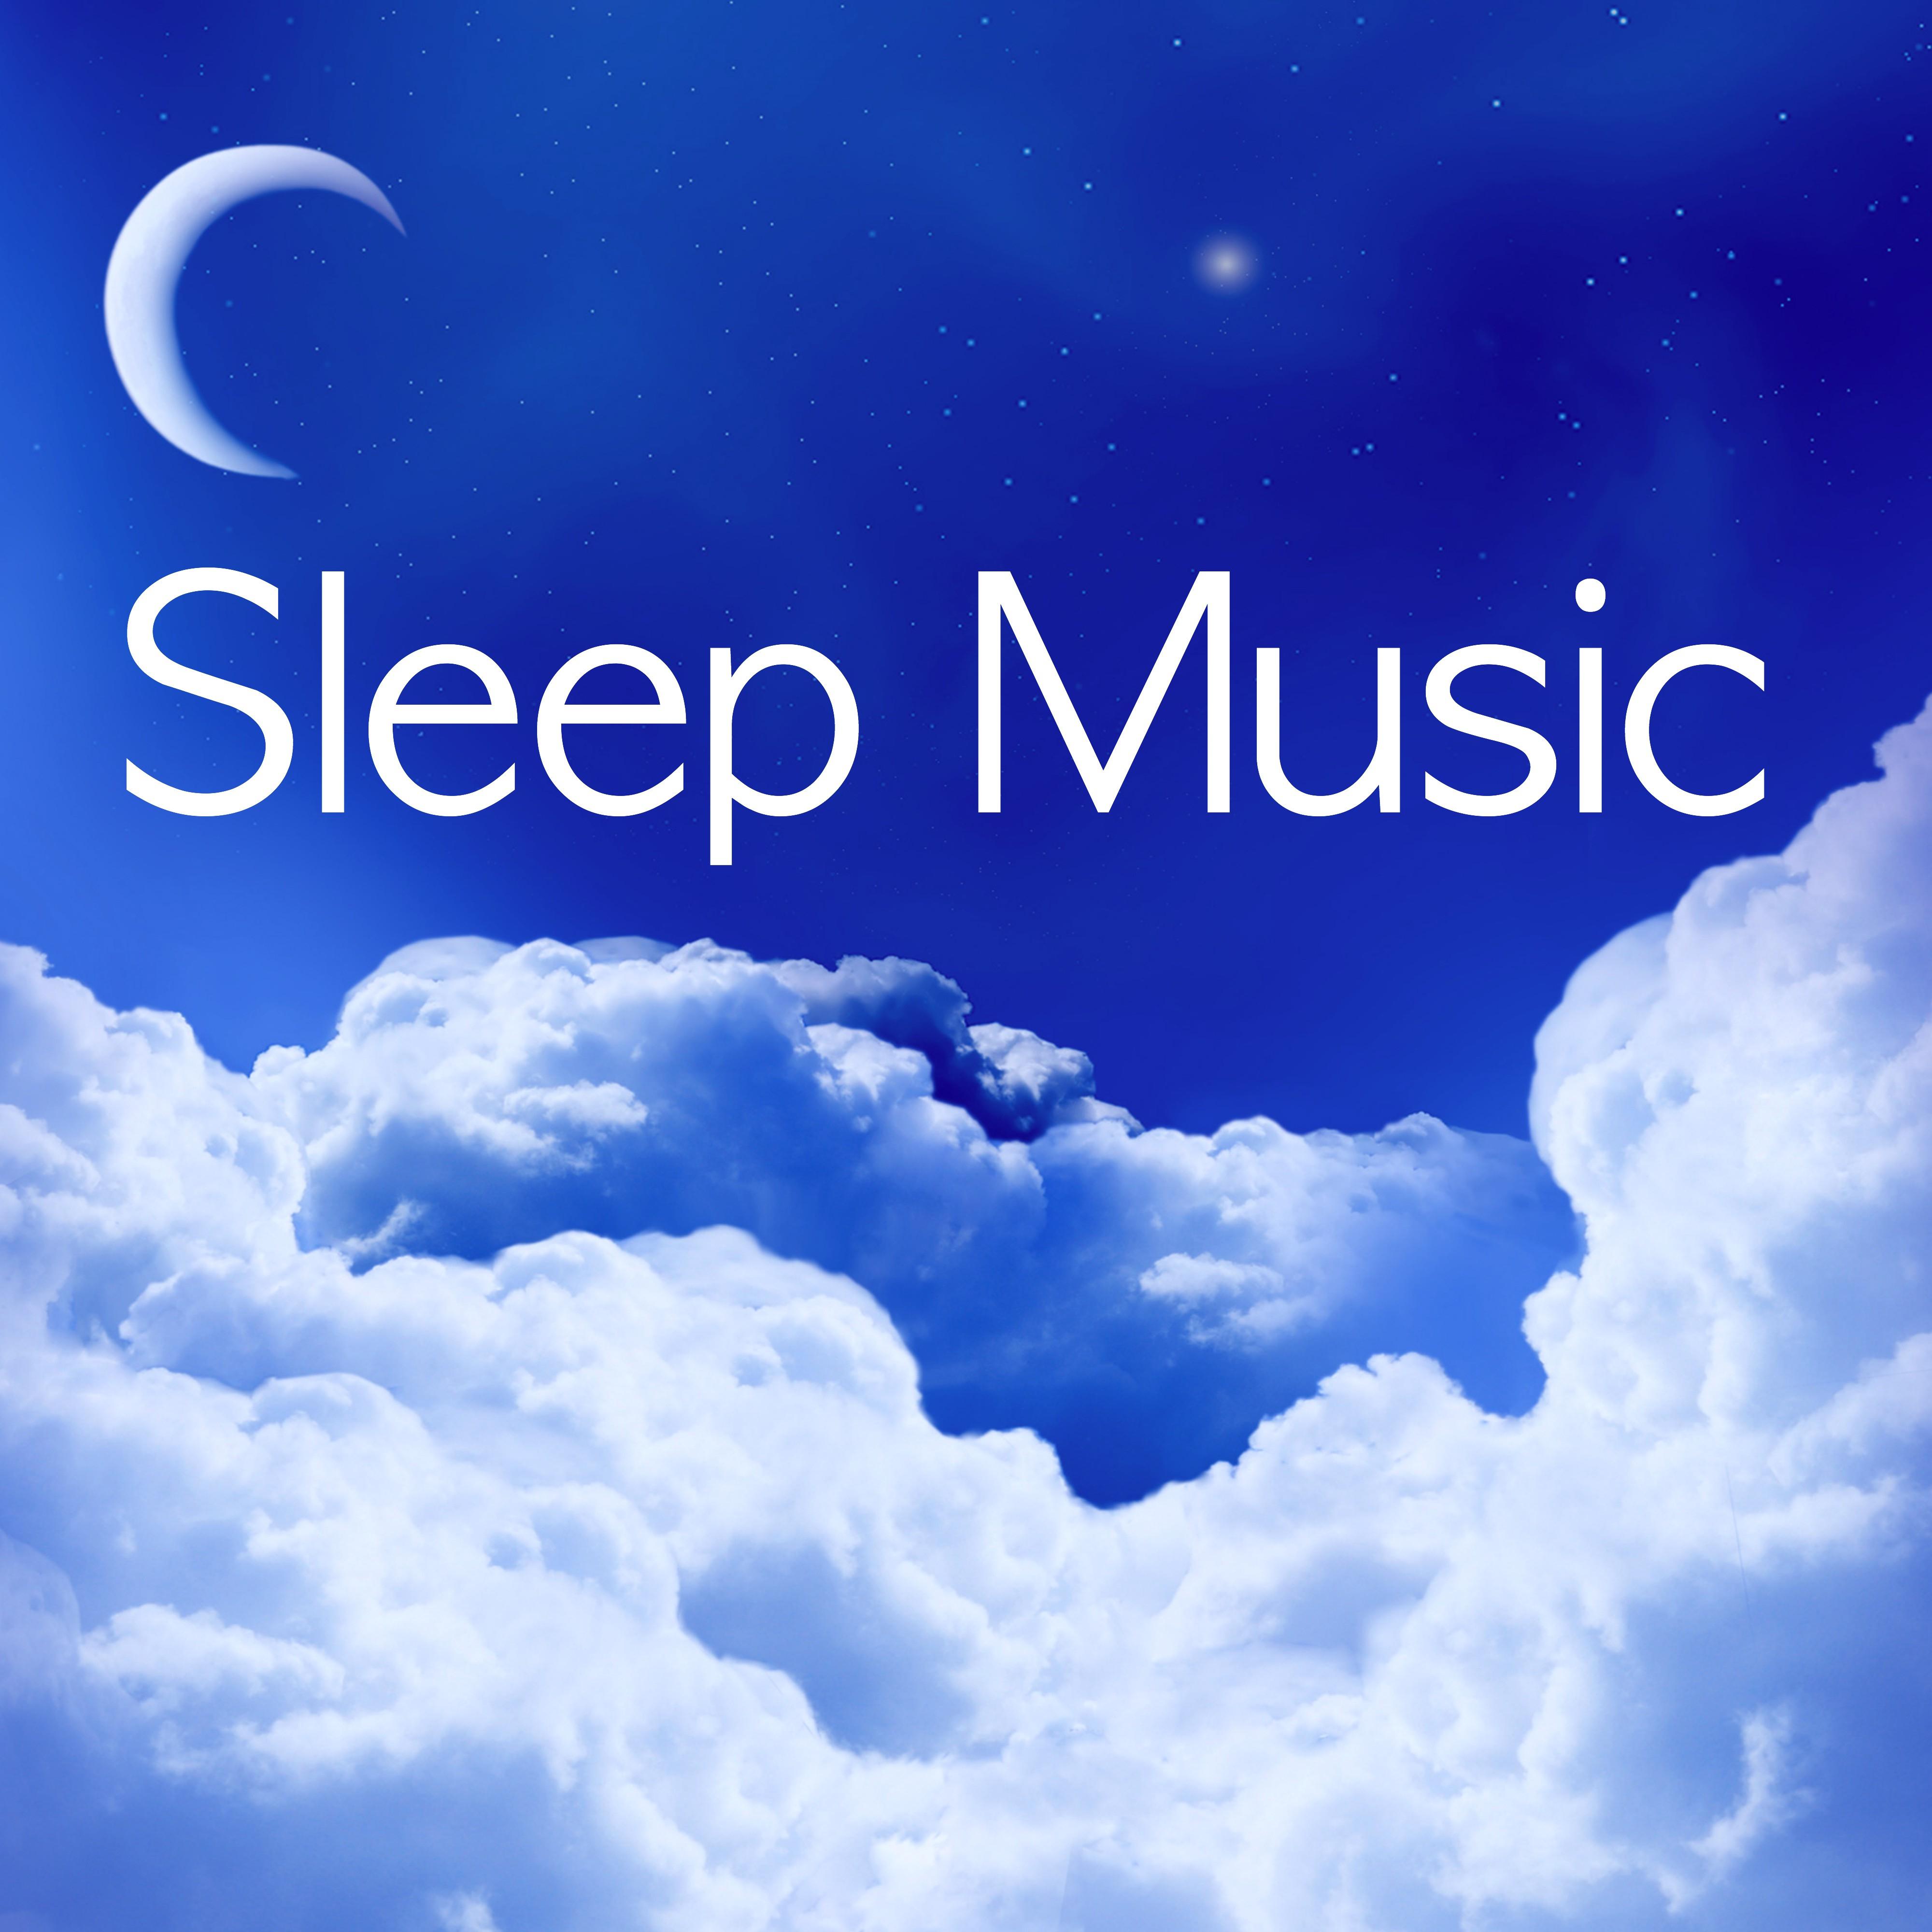 Sleep Music - Relaxing Sleep Music & Sleep Lullabies with Nature Sounds to Meditate; Insomnia Natural Aid, Nature Sounds and Natural Noise to Help You Sleep